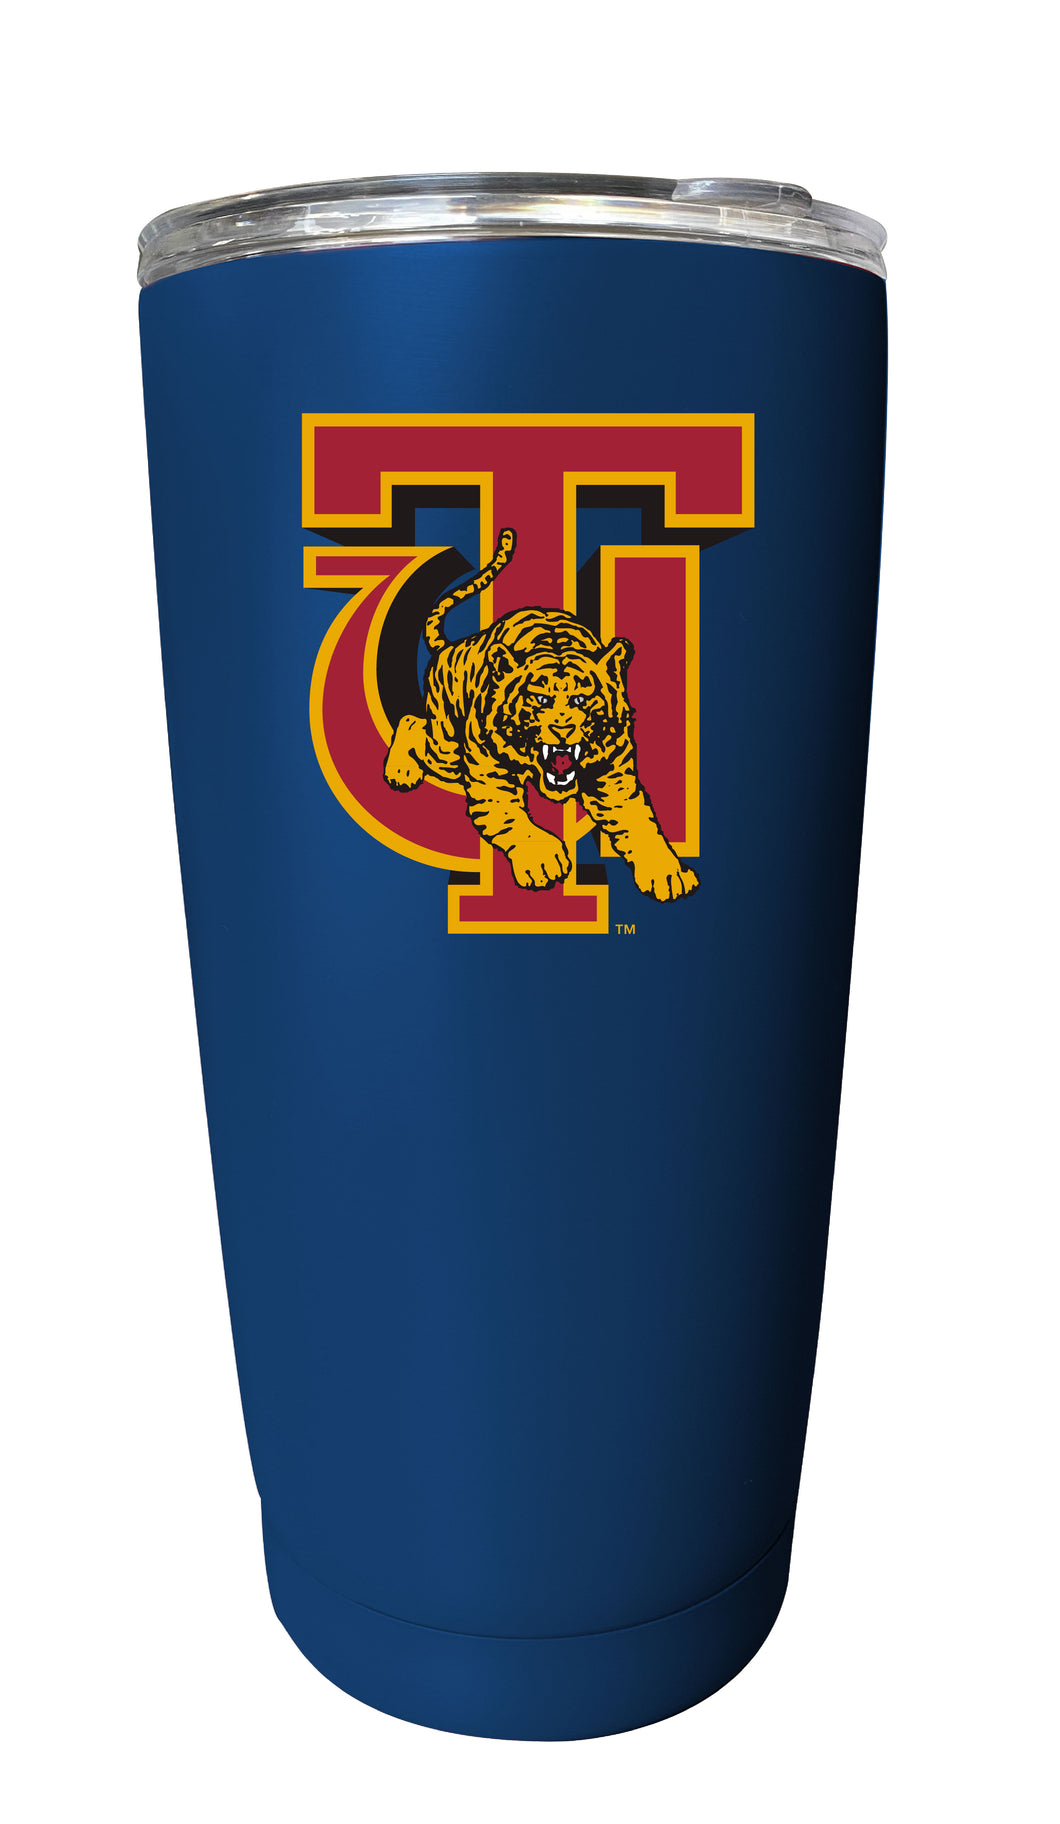 Tuskegee University 16 oz Insulated Stainless Steel Tumbler - Choose Your Color.